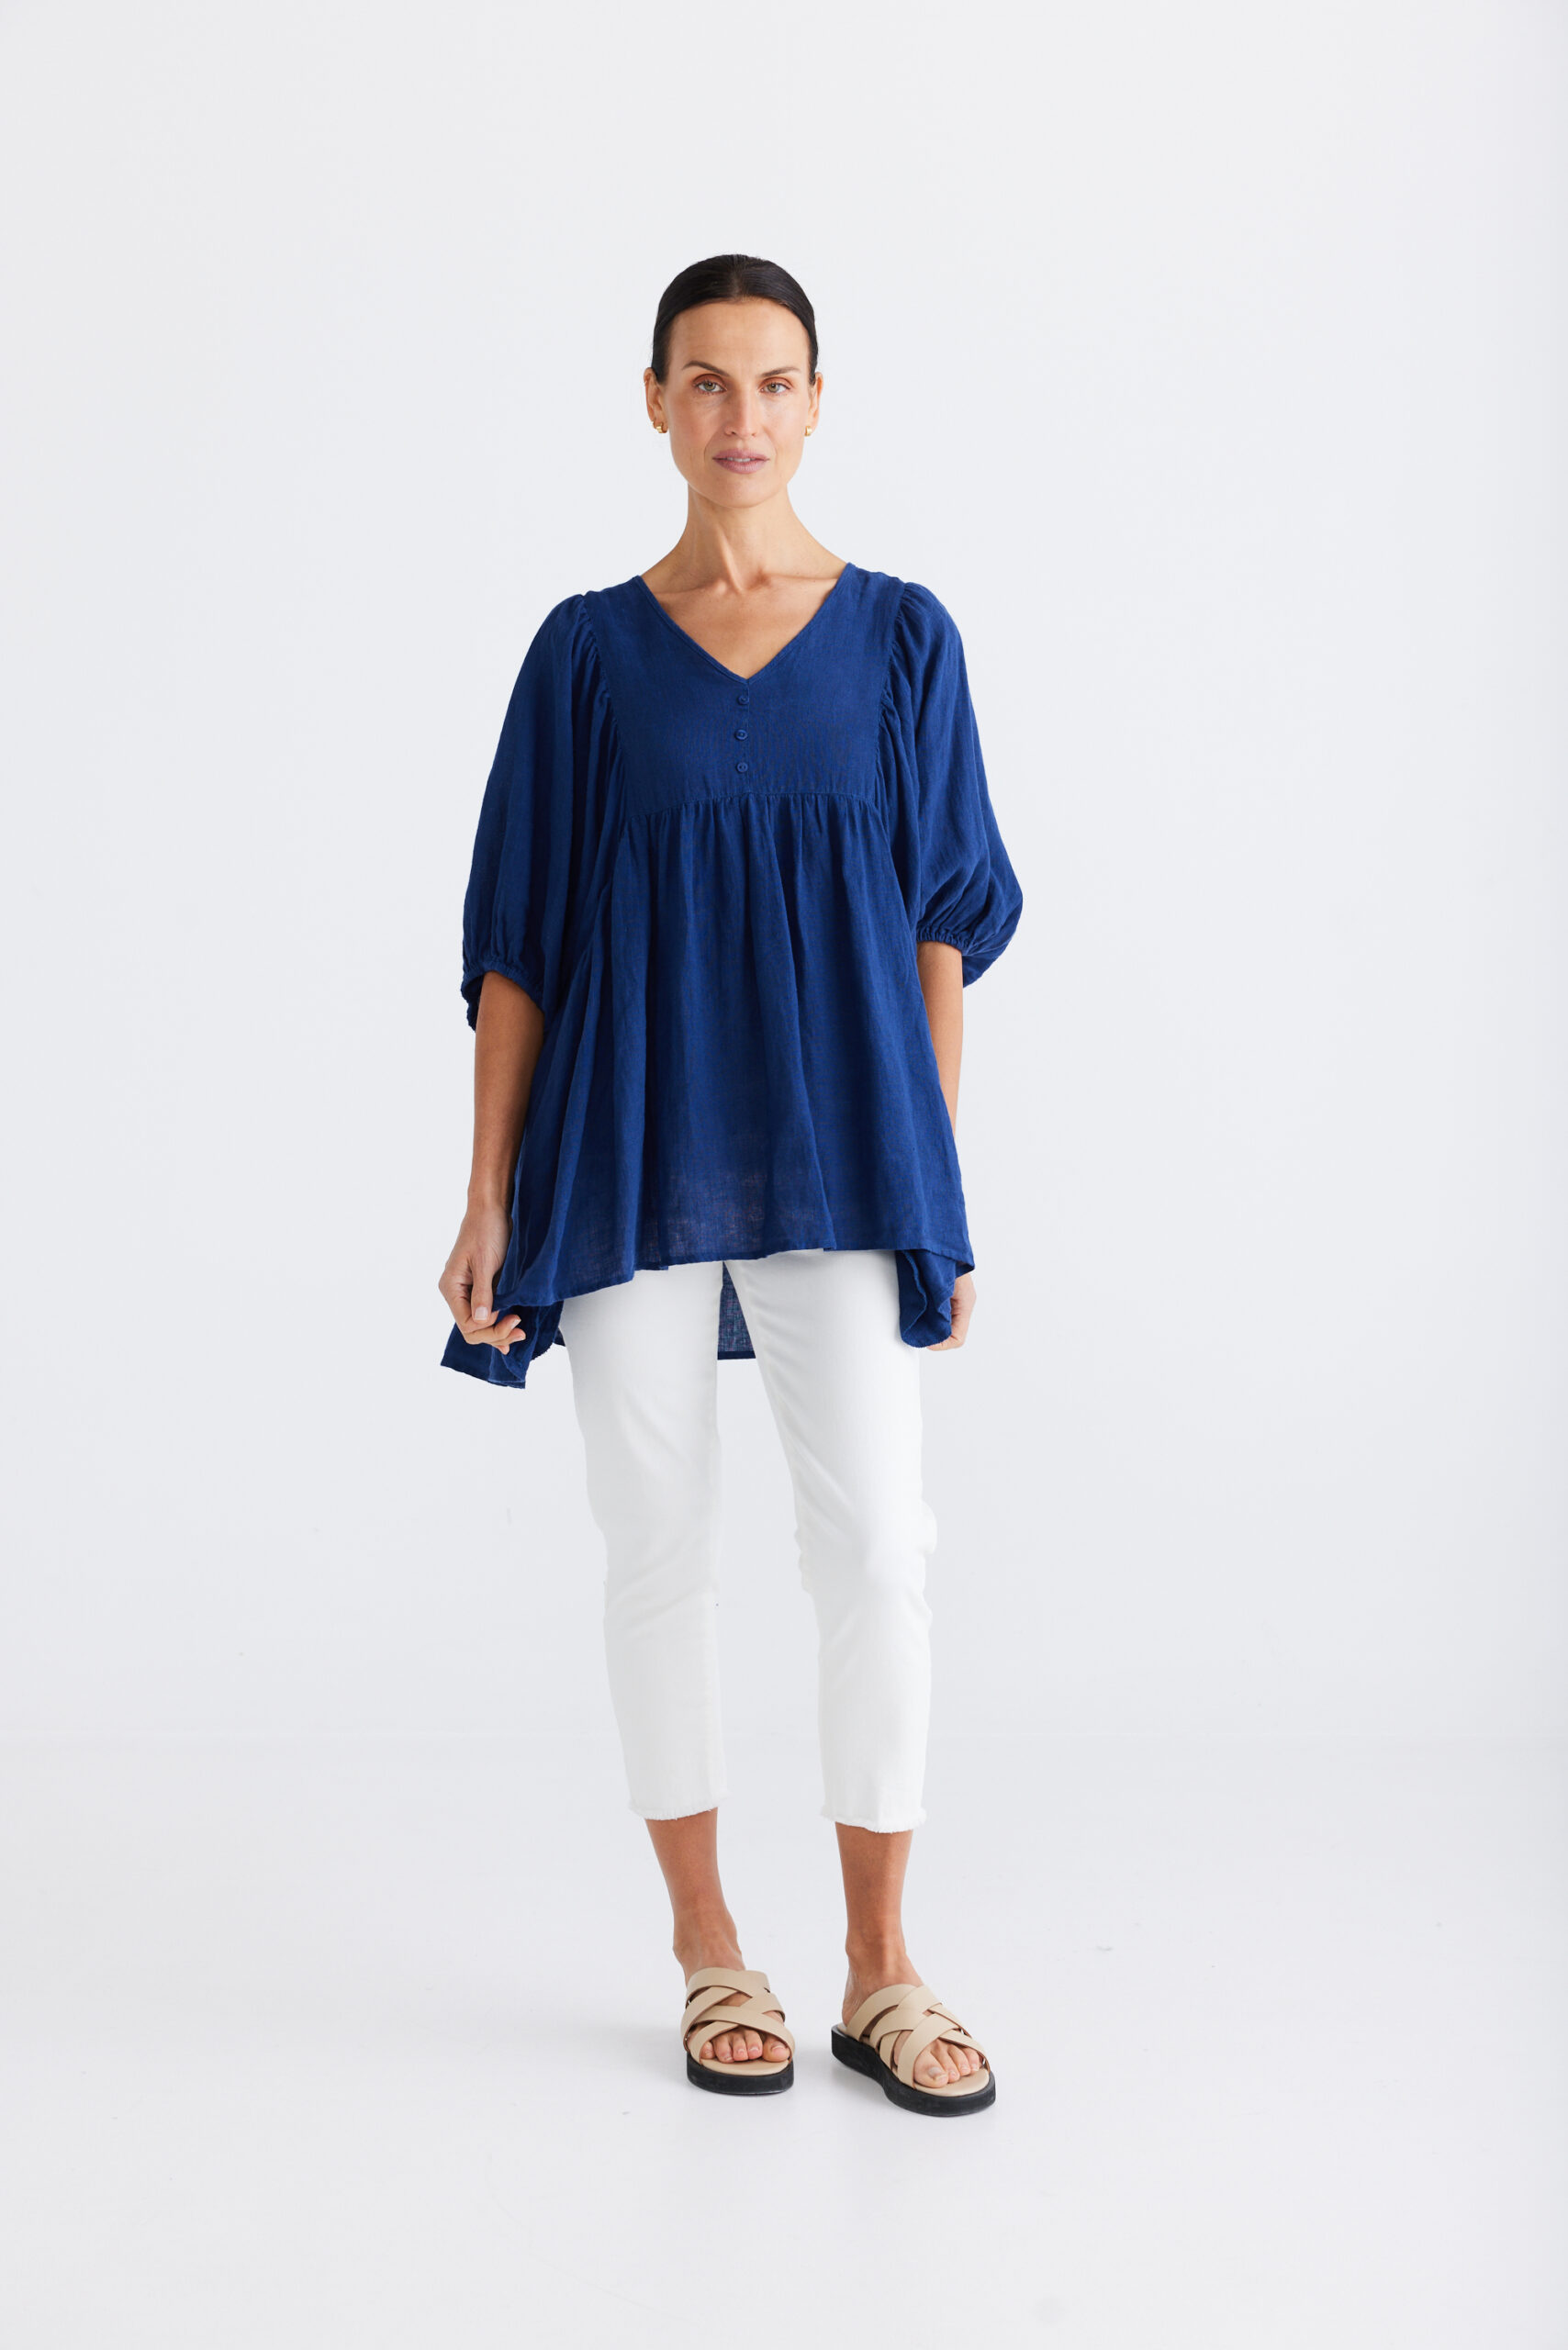 relaxed fit blue linen top with v nexk and balloon sleeves